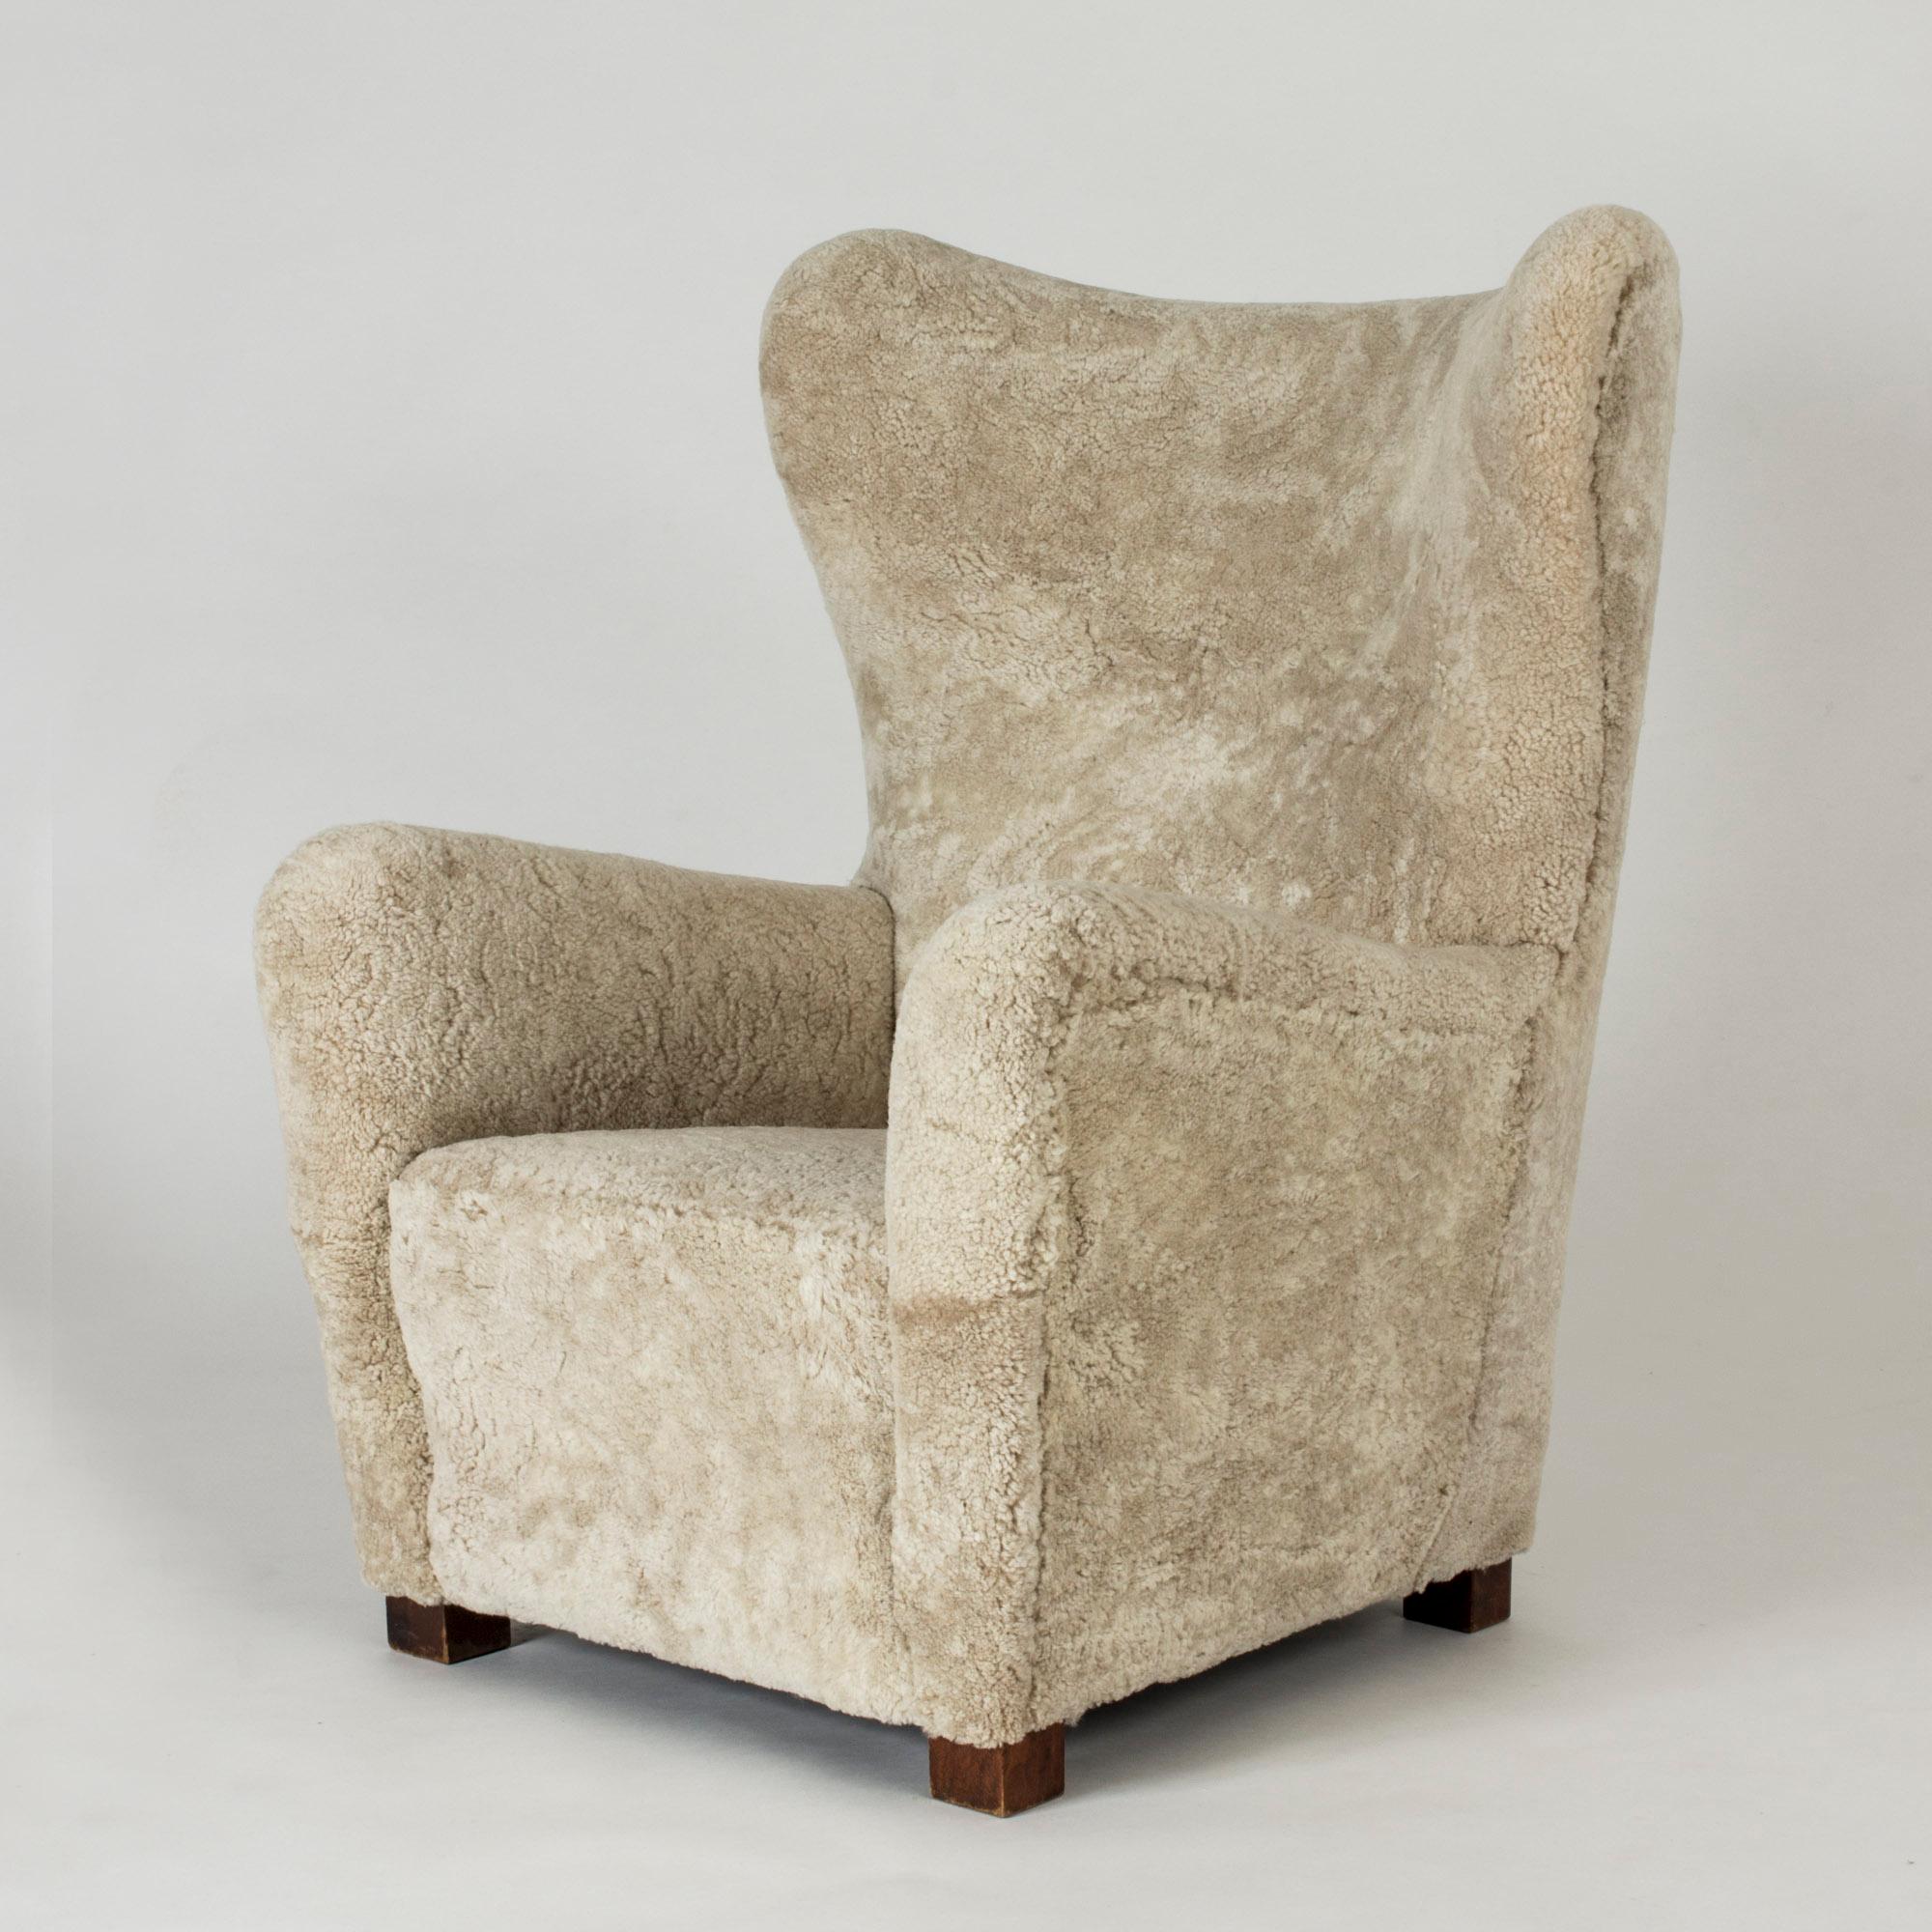 Elegant 1930s lounge chair from Fritz Hansen, with clean, stately lines. Upholstered with sheepskin that softens the silhouette.